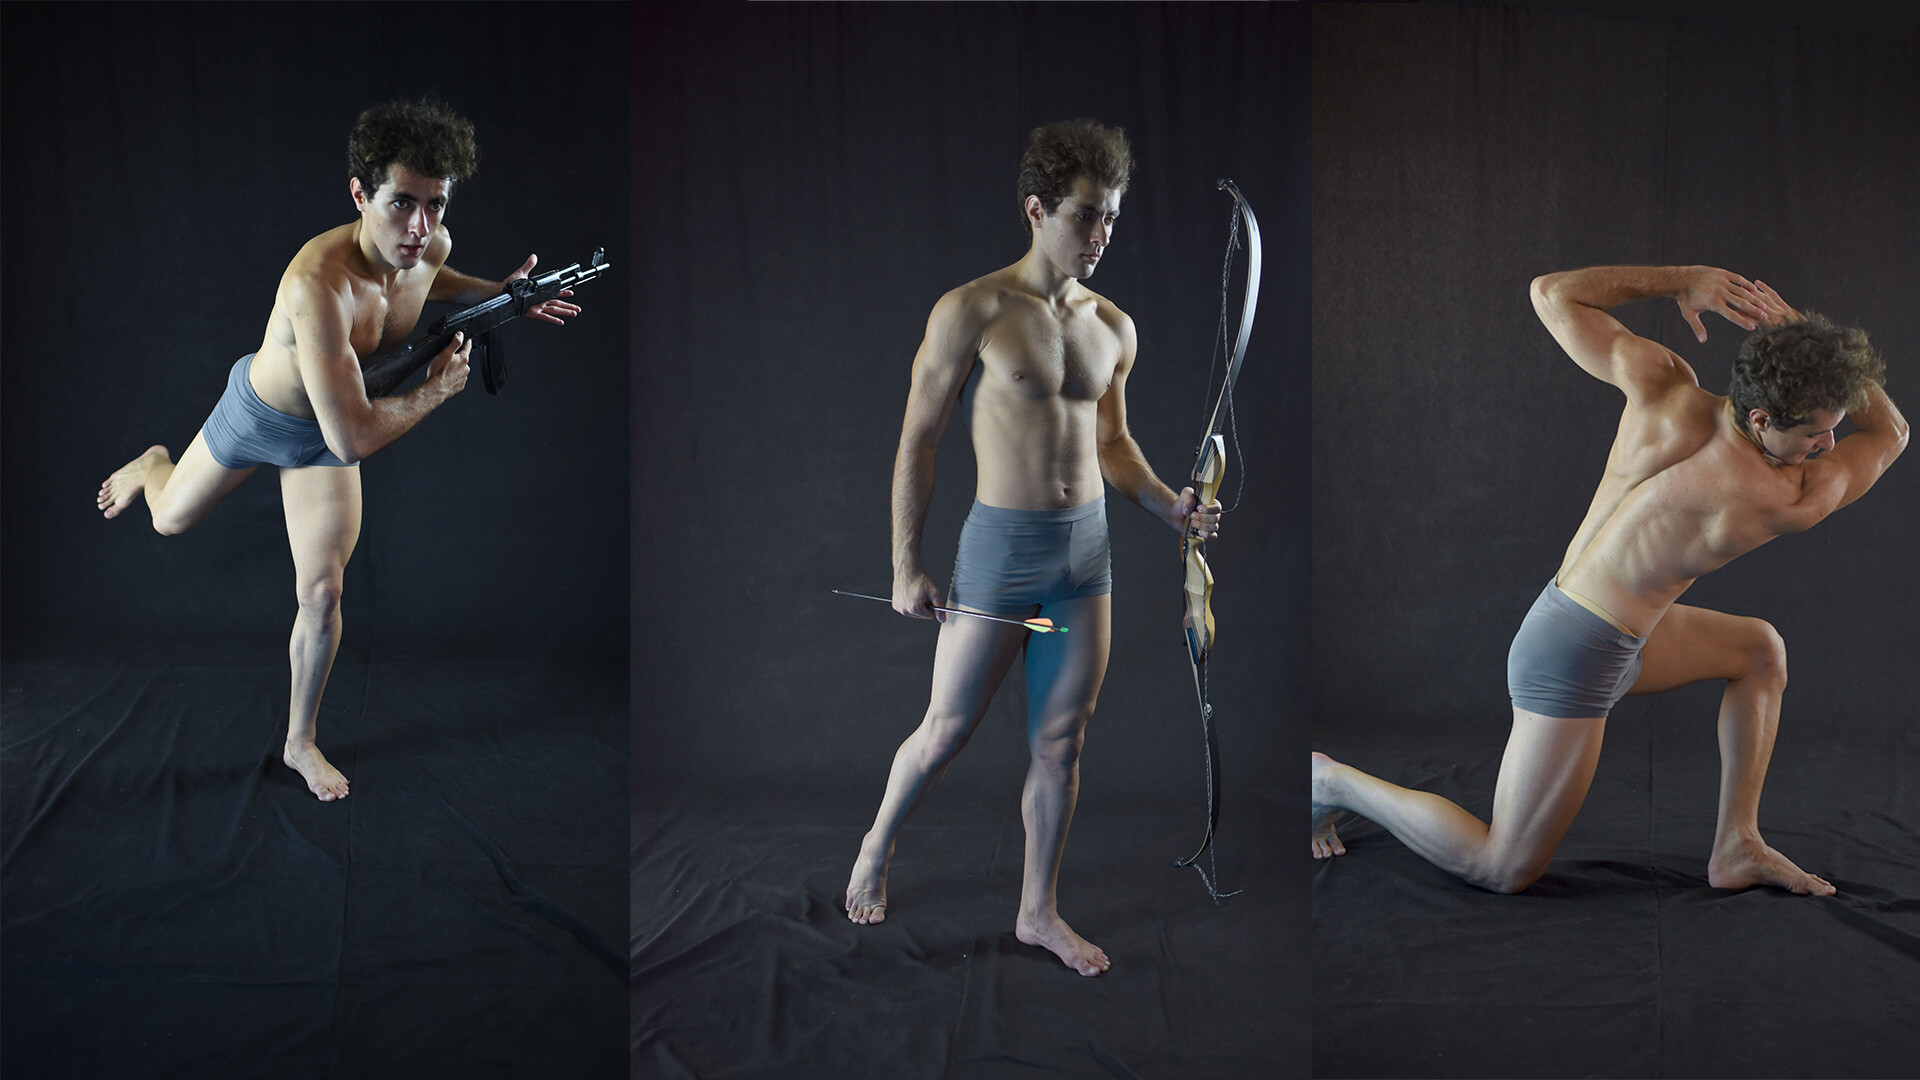 Poses set 5 - Male action poses by Sellenin on DeviantArt